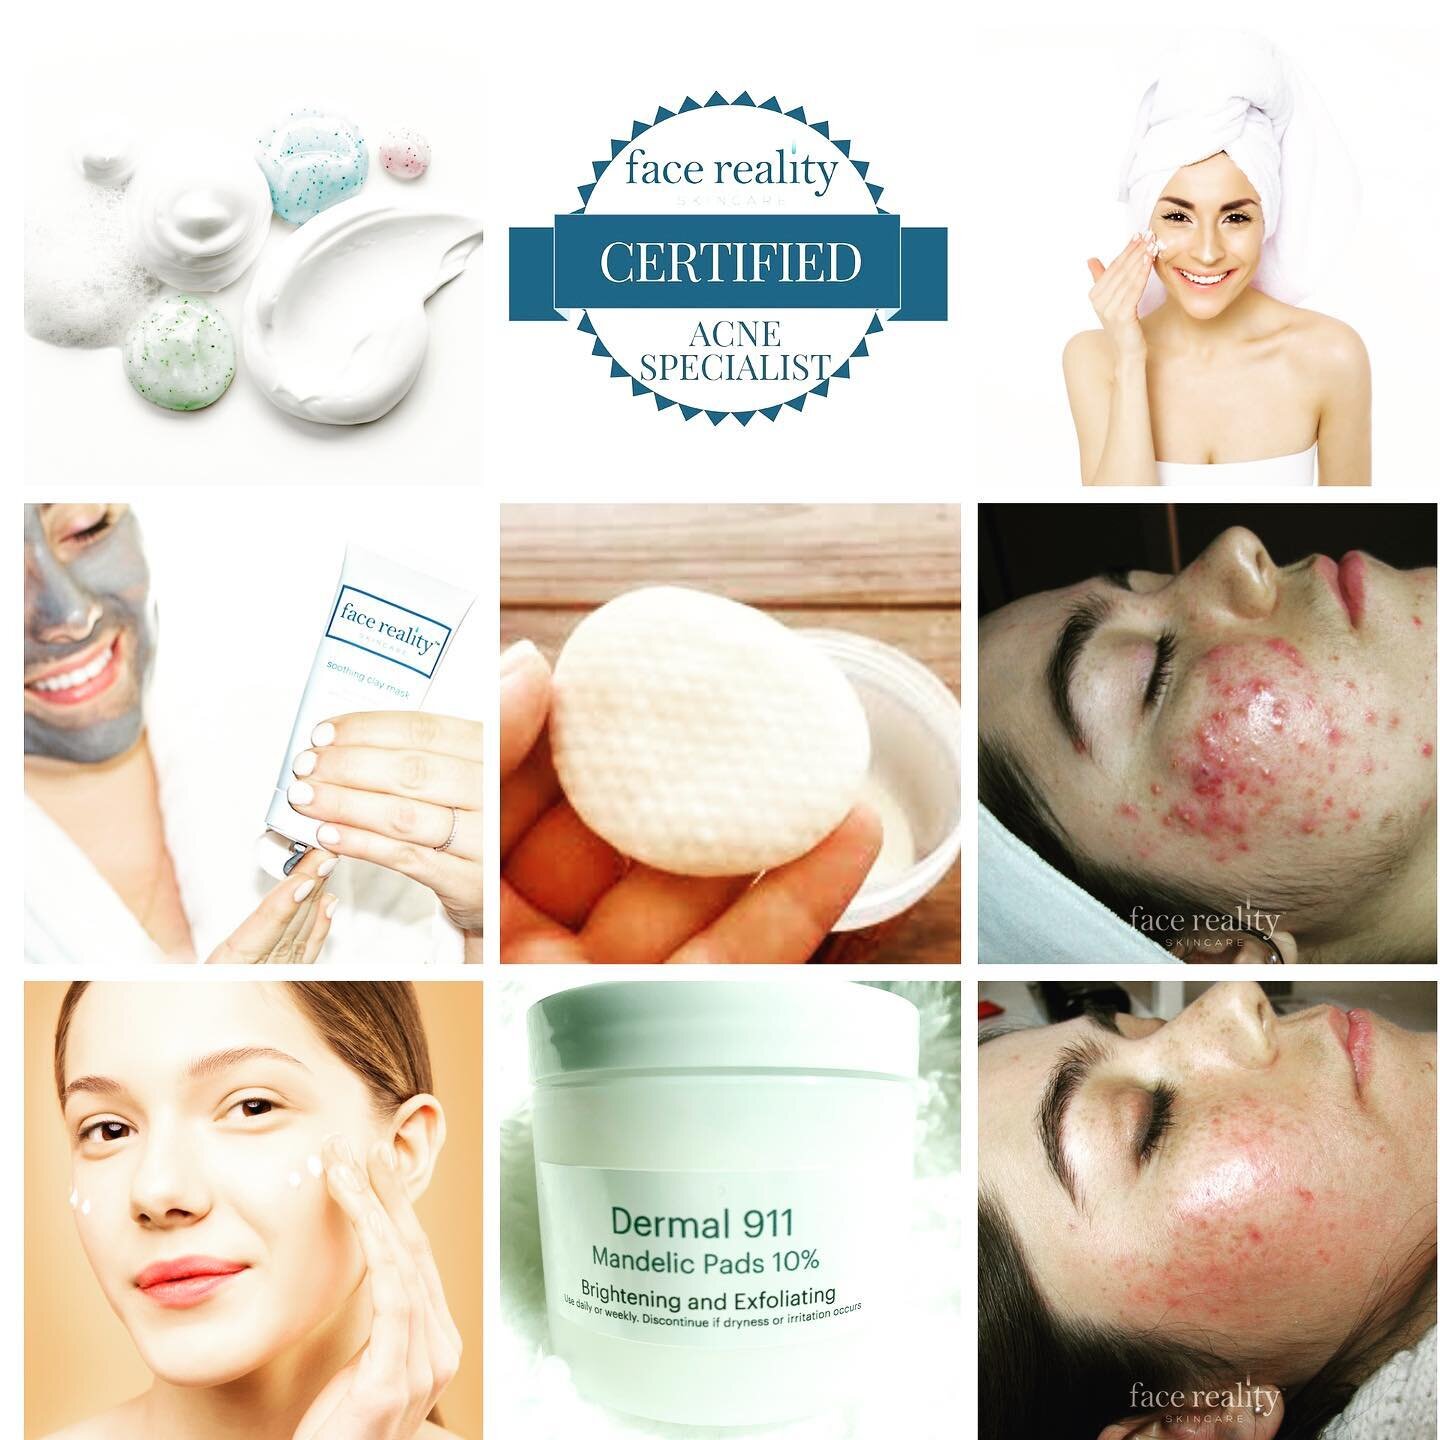 It takes a variety of things to tackle acne.